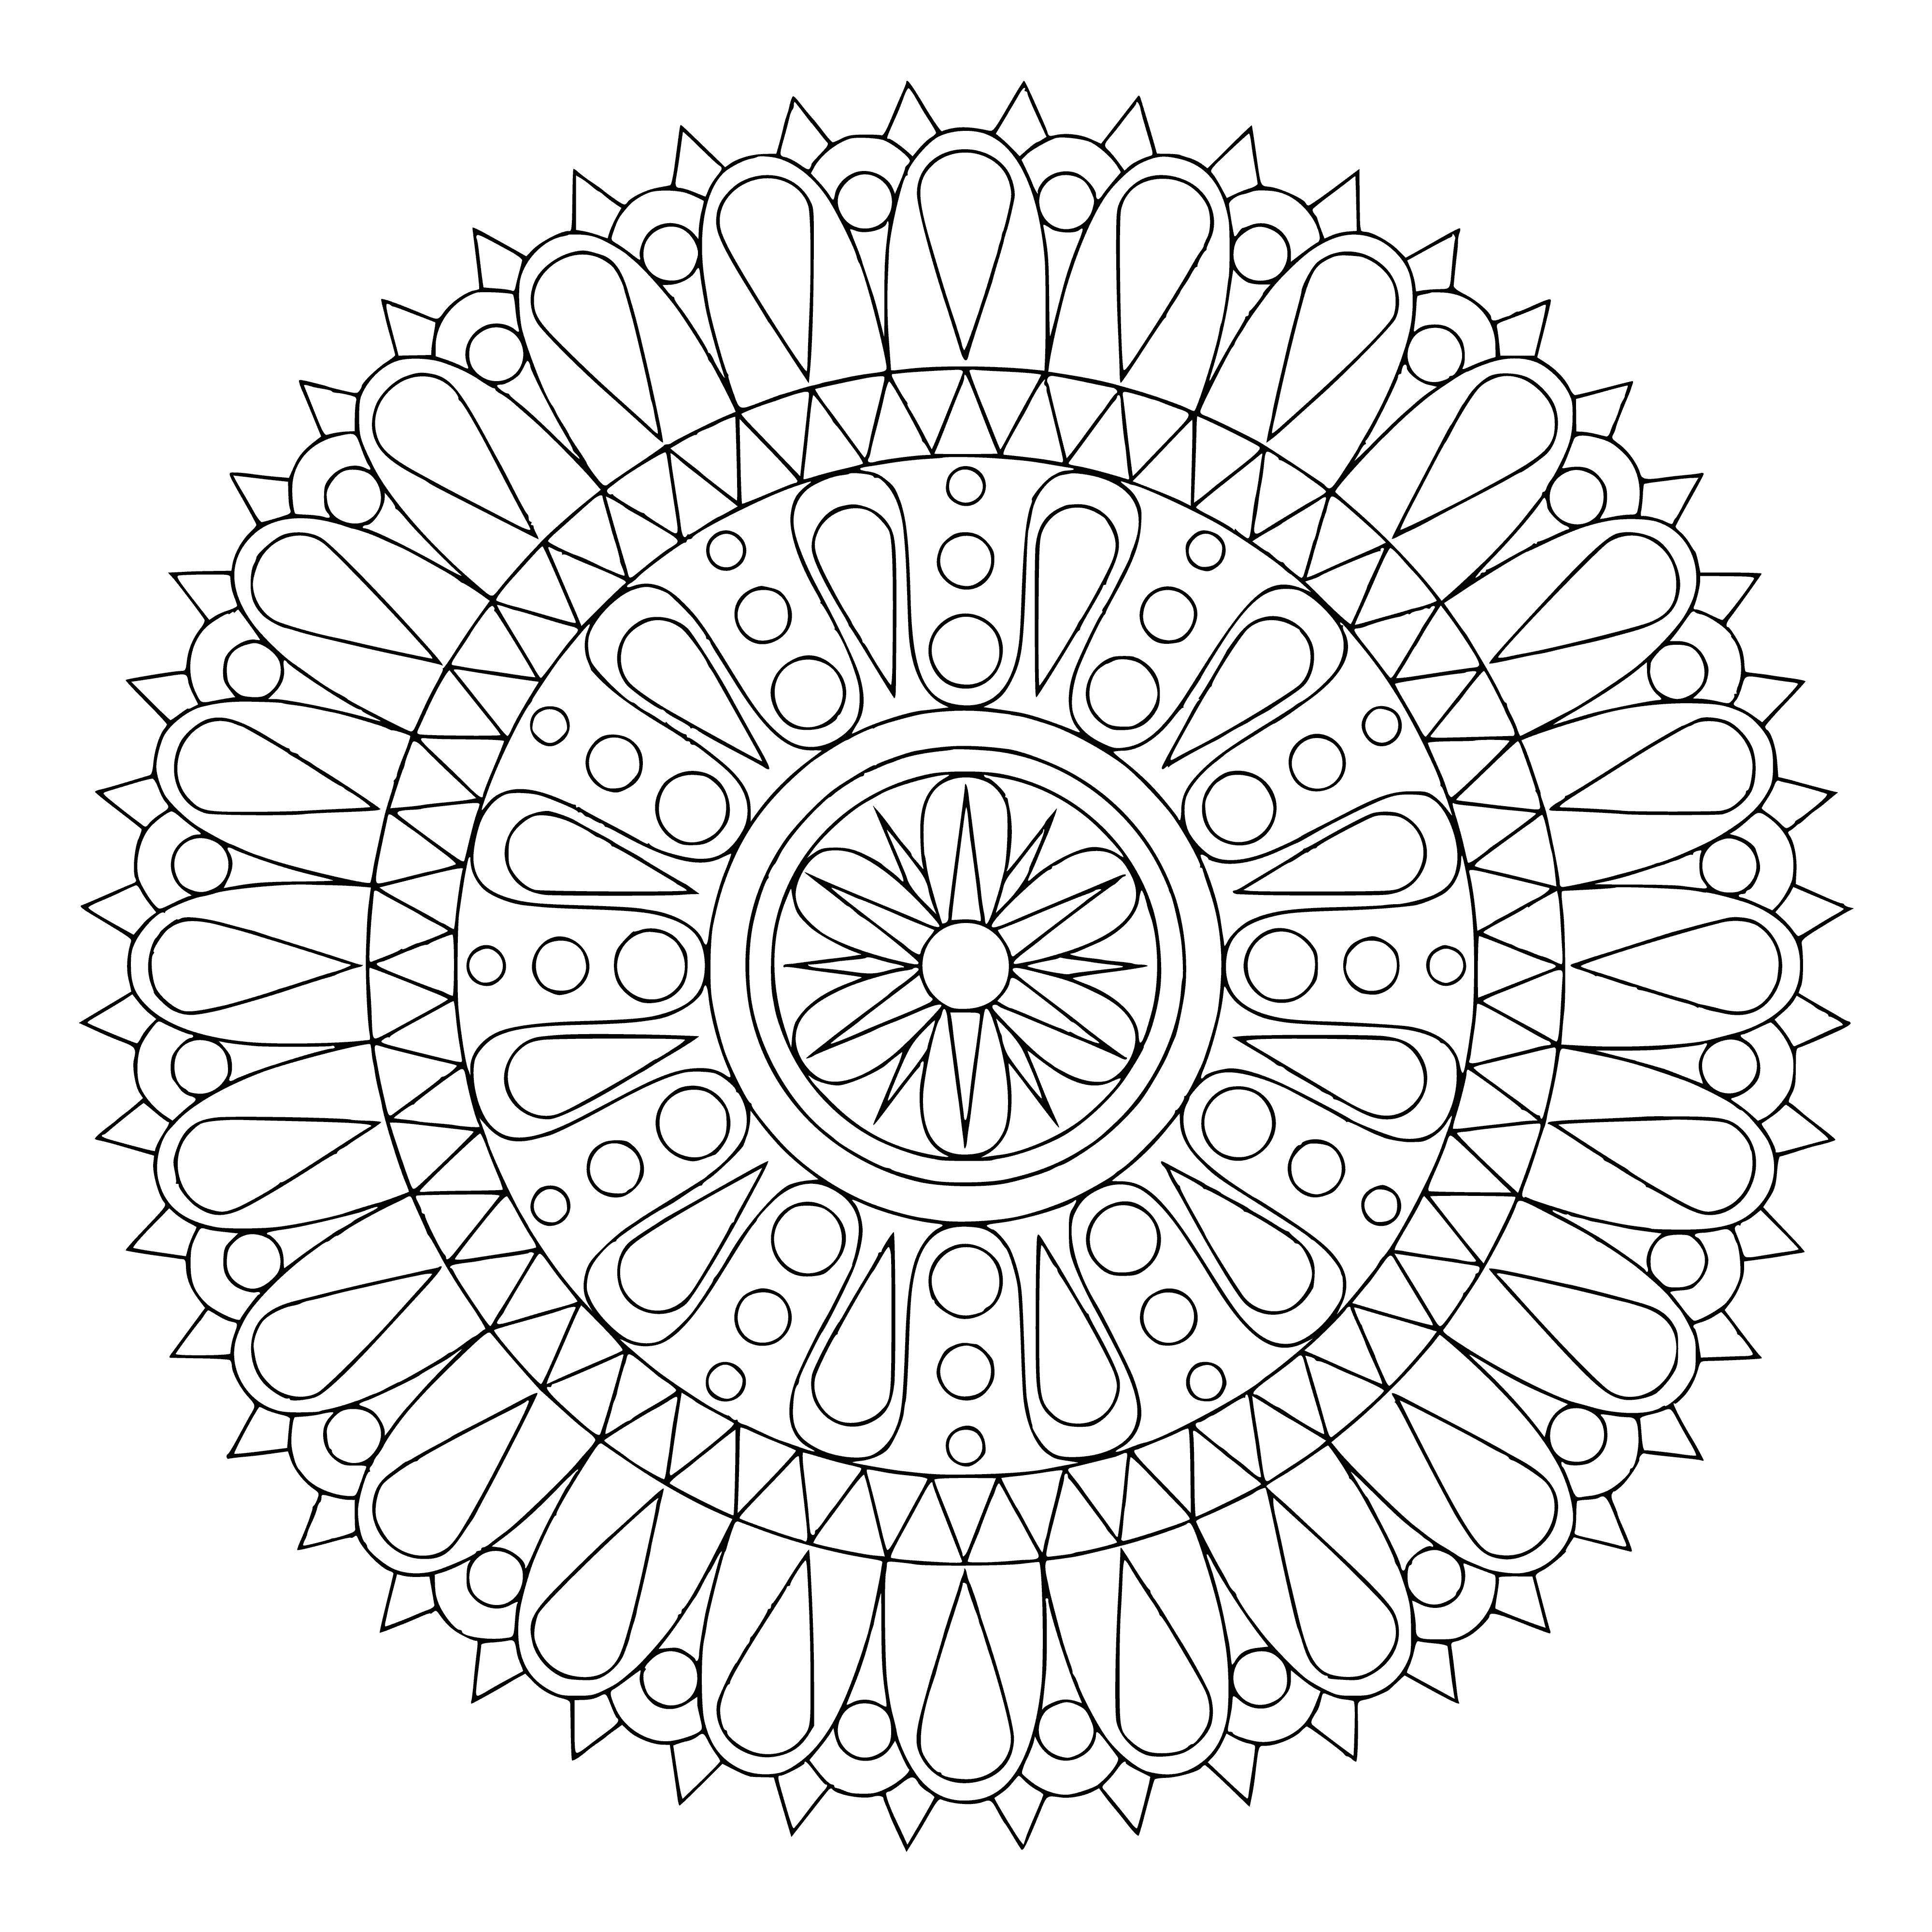 coloring page: Bright, varied circles create beautiful, intricate mandala with increasing intricacy and detail as one approaches the center.